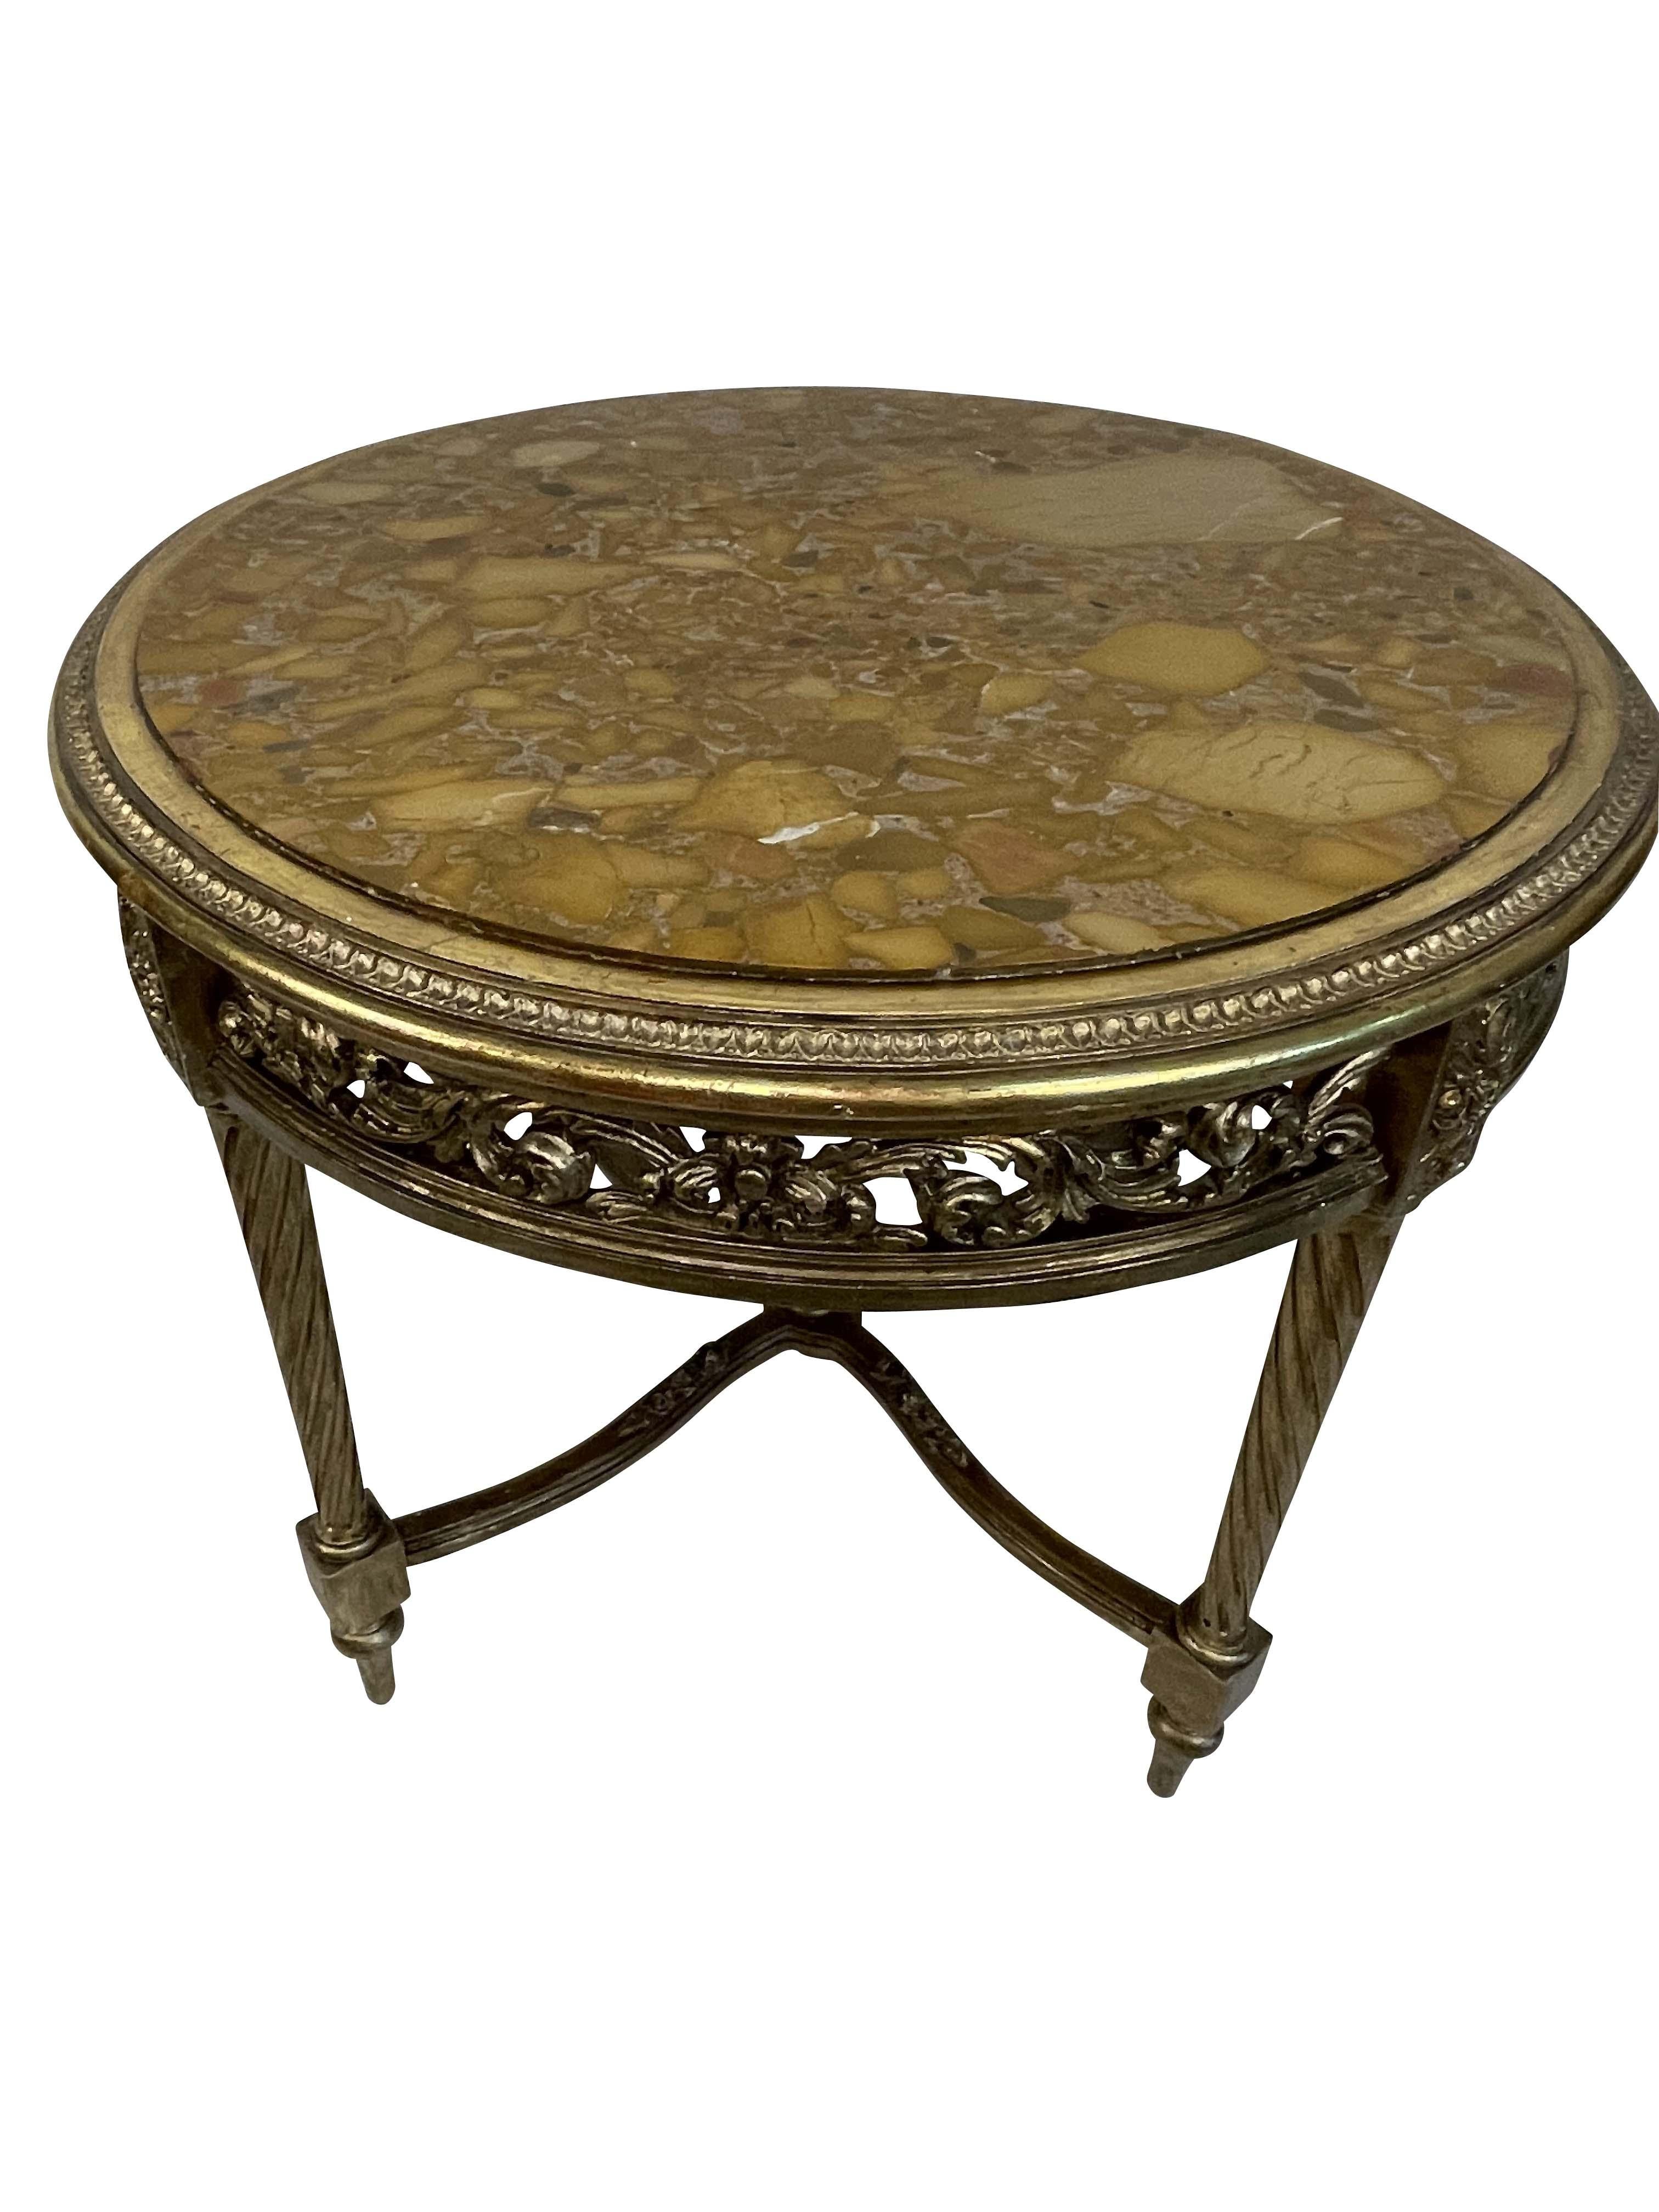 Hand-Carved 19th Century Italian Gilt Round Table with Marble Top  For Sale